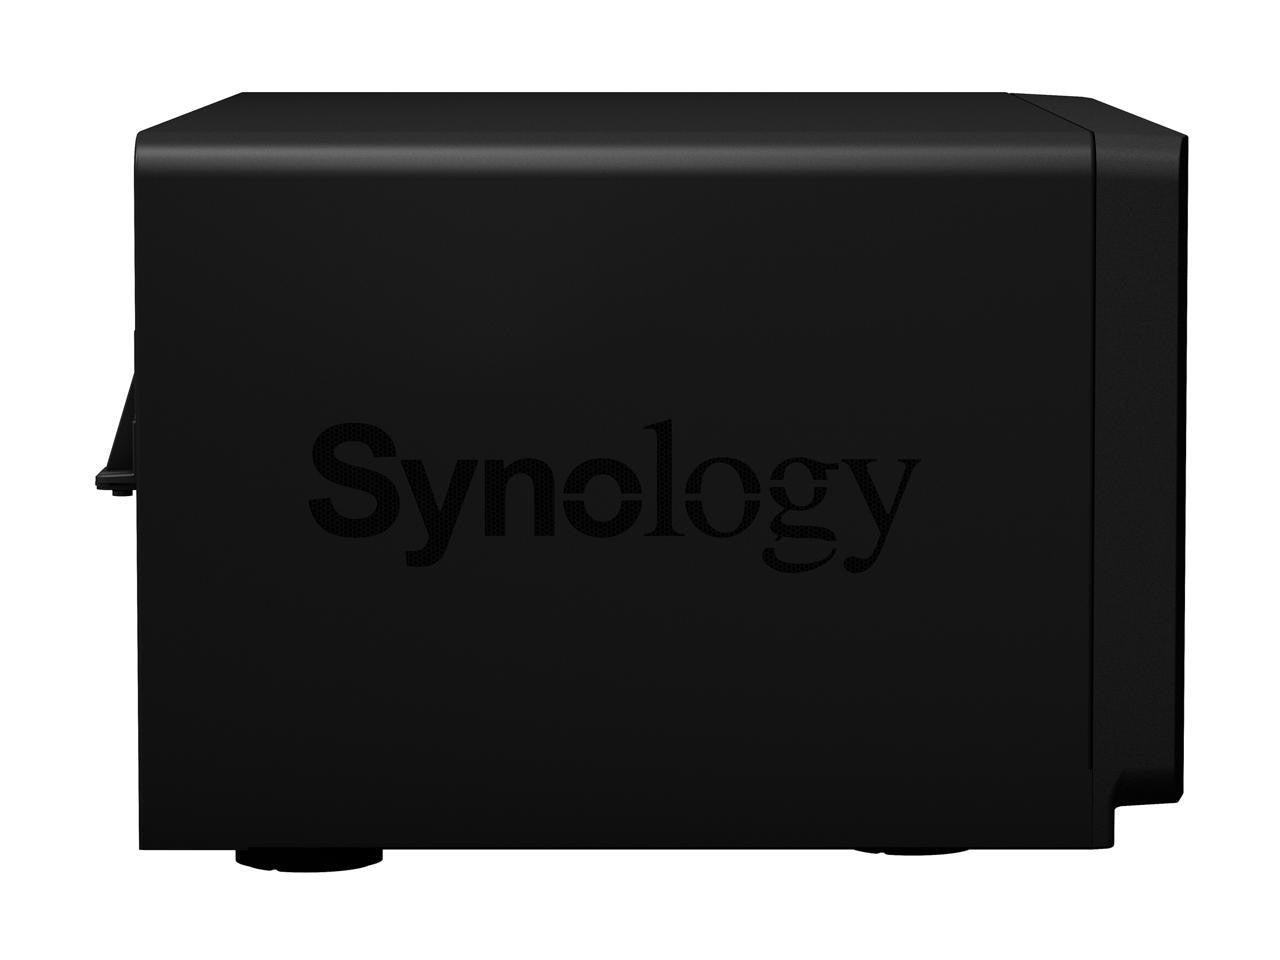 Synology DS1821+ 8-BAY DiskStation with 16GB Synology RAM and 24TB (8x3TB) Western Digital RED PLUS Drives Fully Assembled and Tested